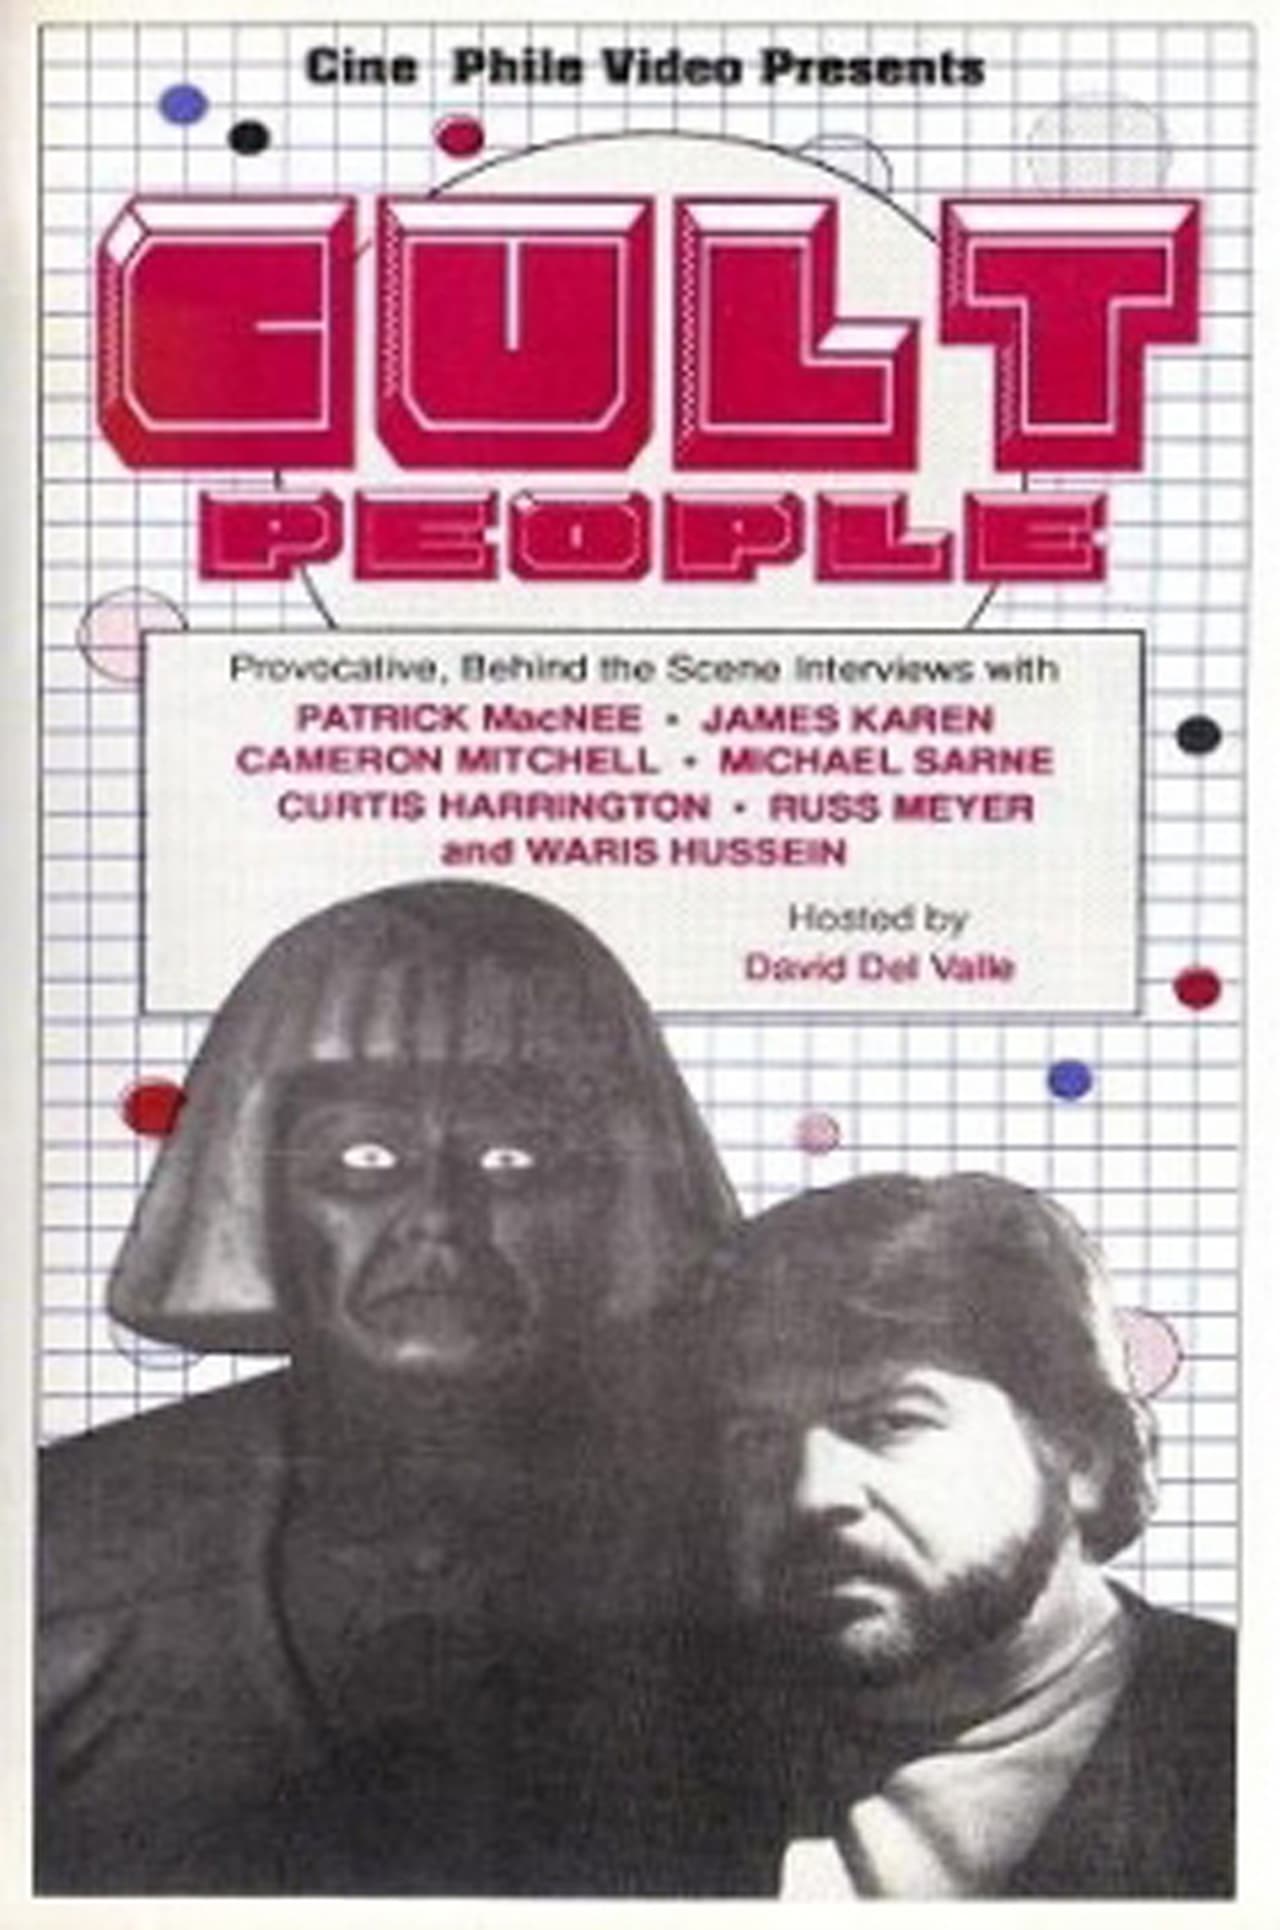 Cult People (1989) starring David Del Valle on DVD on DVD